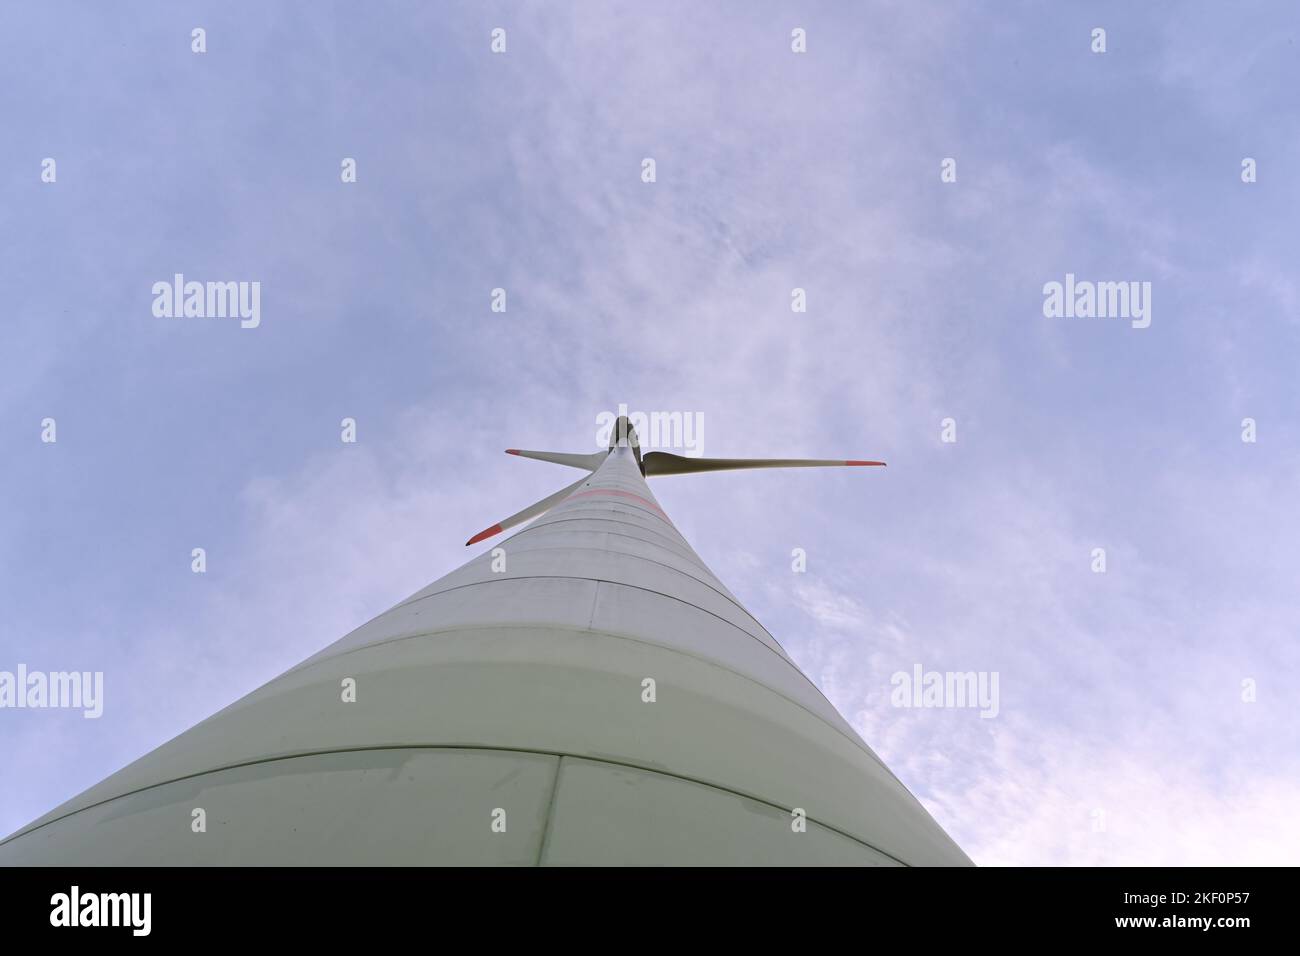 Low angle view on propeller and column of on-shore wind turbine against blue sky supplying with renewable energy the needs of inhabitants. Stock Photo